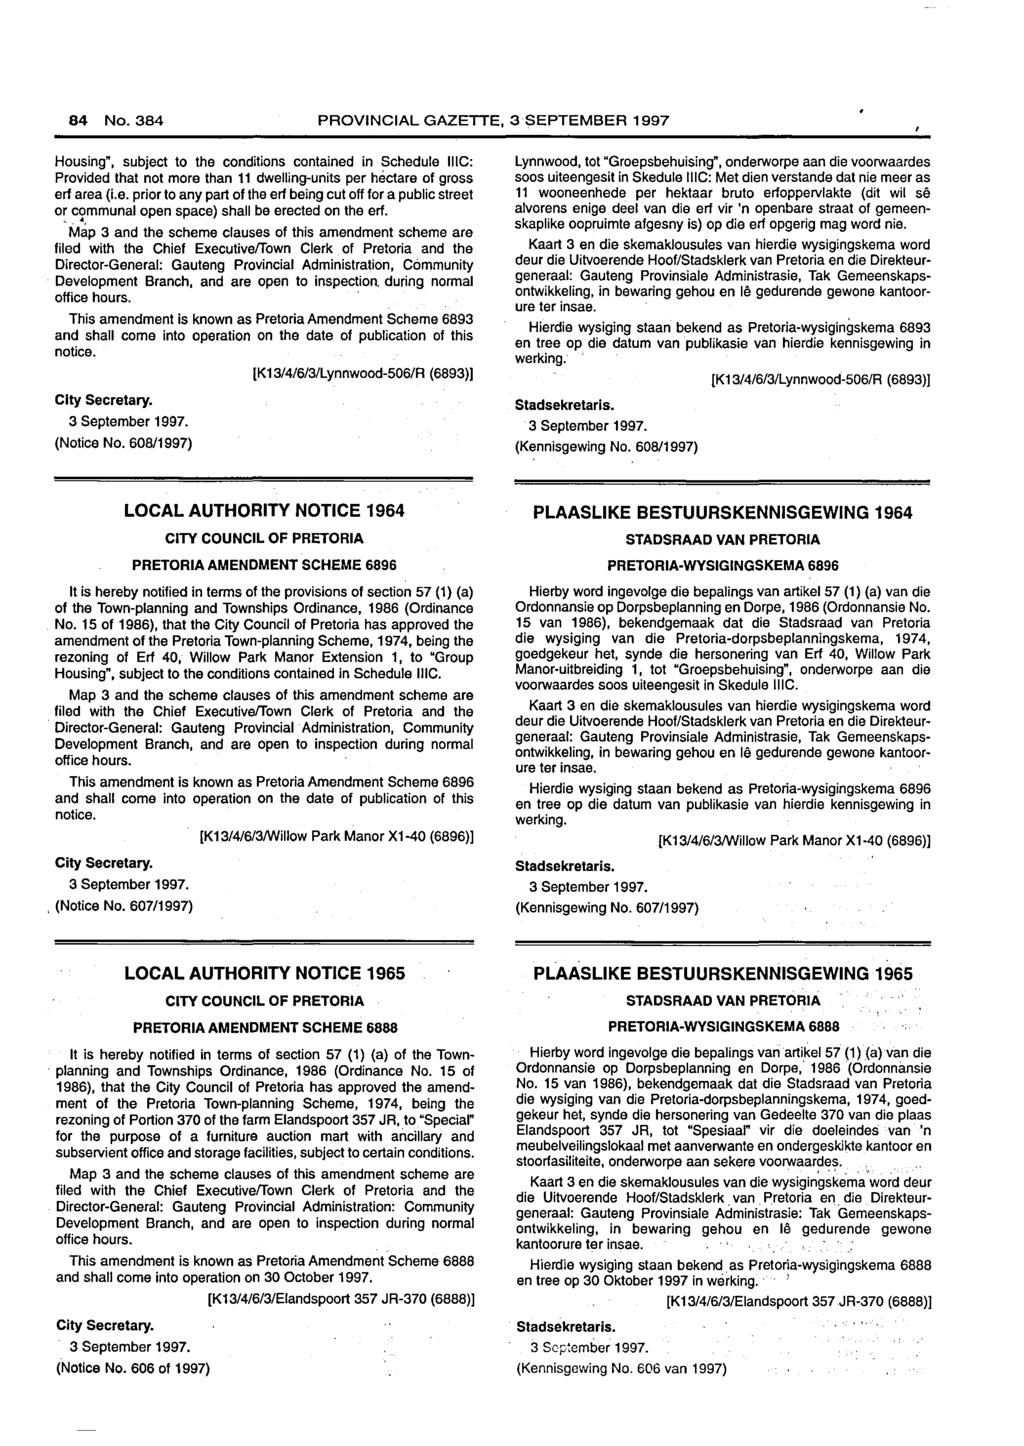 84 No. PROVINCIAL GAZETTE, 3 SEPTEMBER 1997 Housing", subject to the conditions contained in Schedule IIIC: Provided that not more than 11 dwelling-units per hectare of gross erf area (i.e. prior to any part of the erf being cut off for a public street or communal open space) shall be erected on the erf.